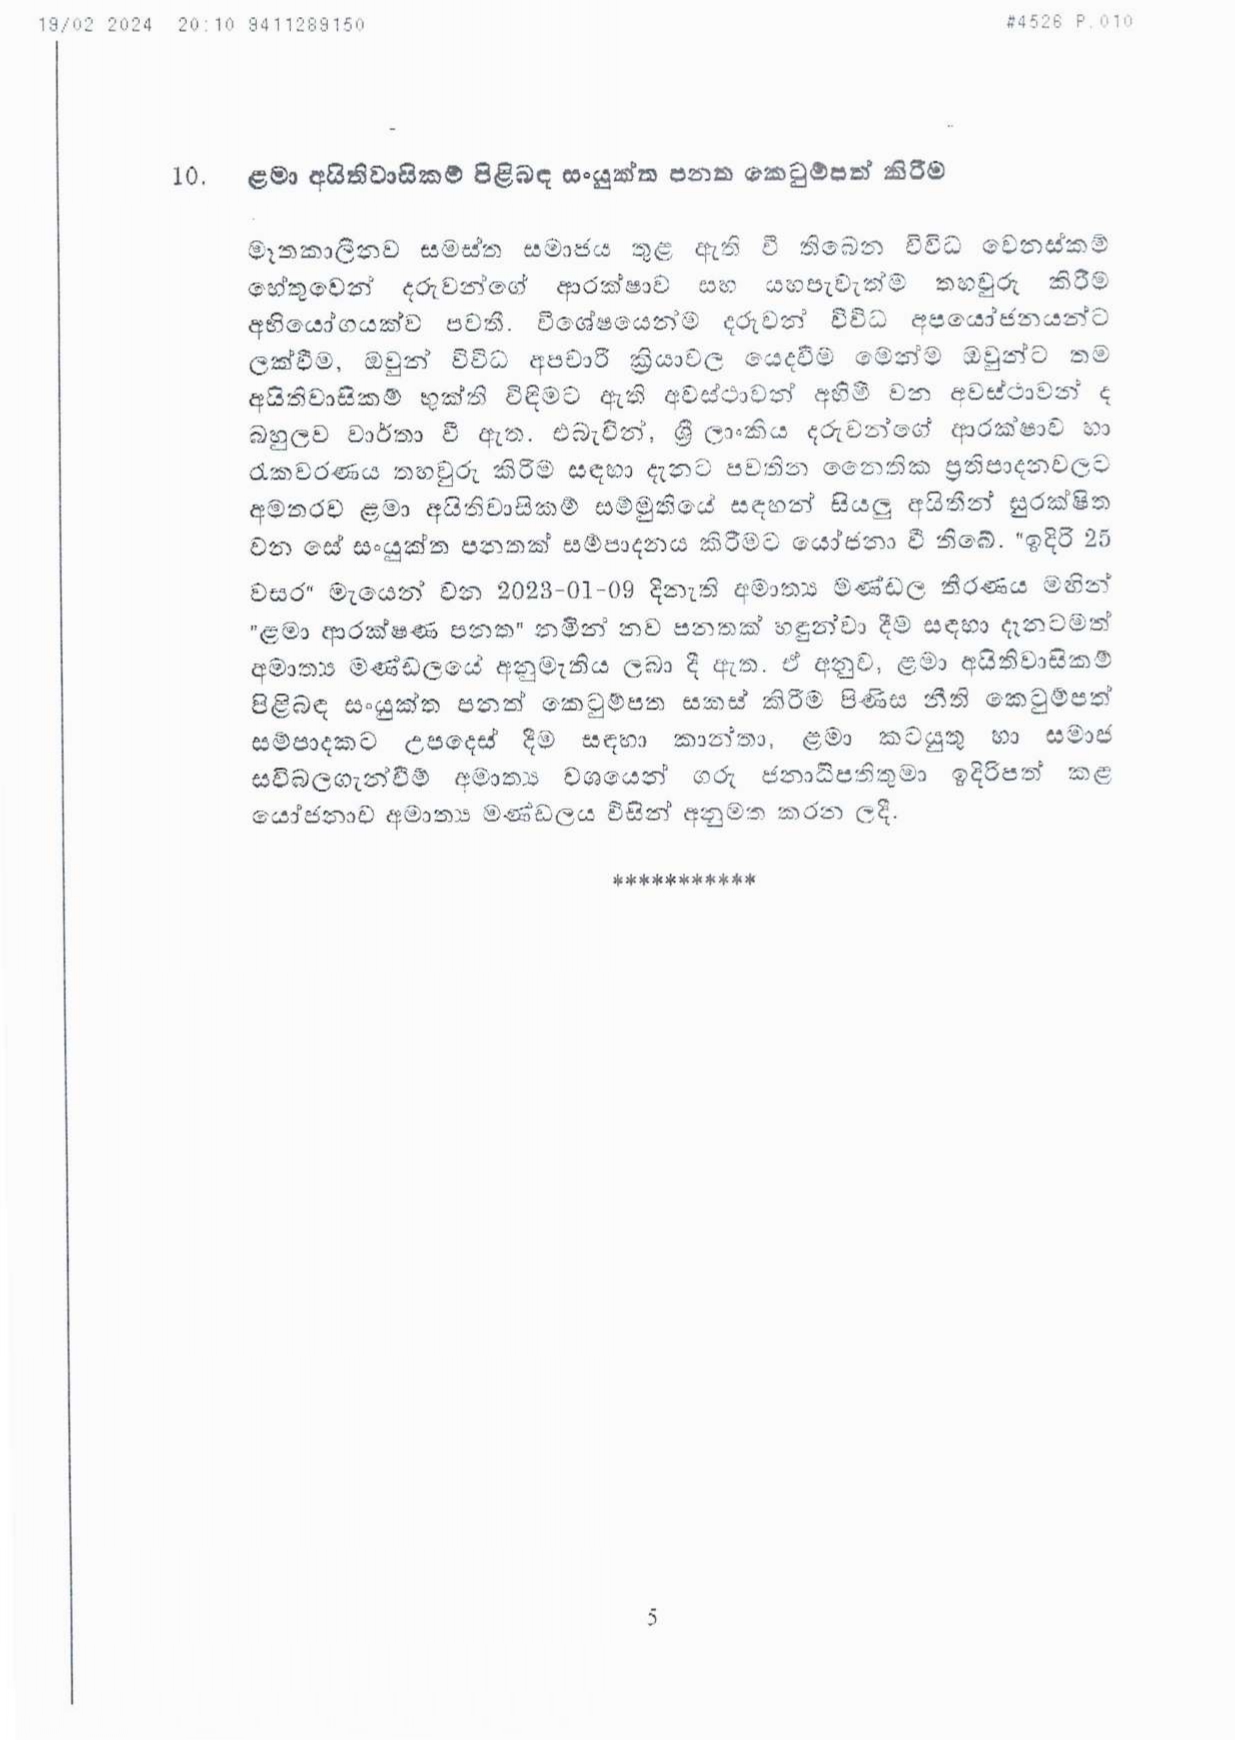 Cabinet Decisions on 19.02.2024 Merged 1 page 00051